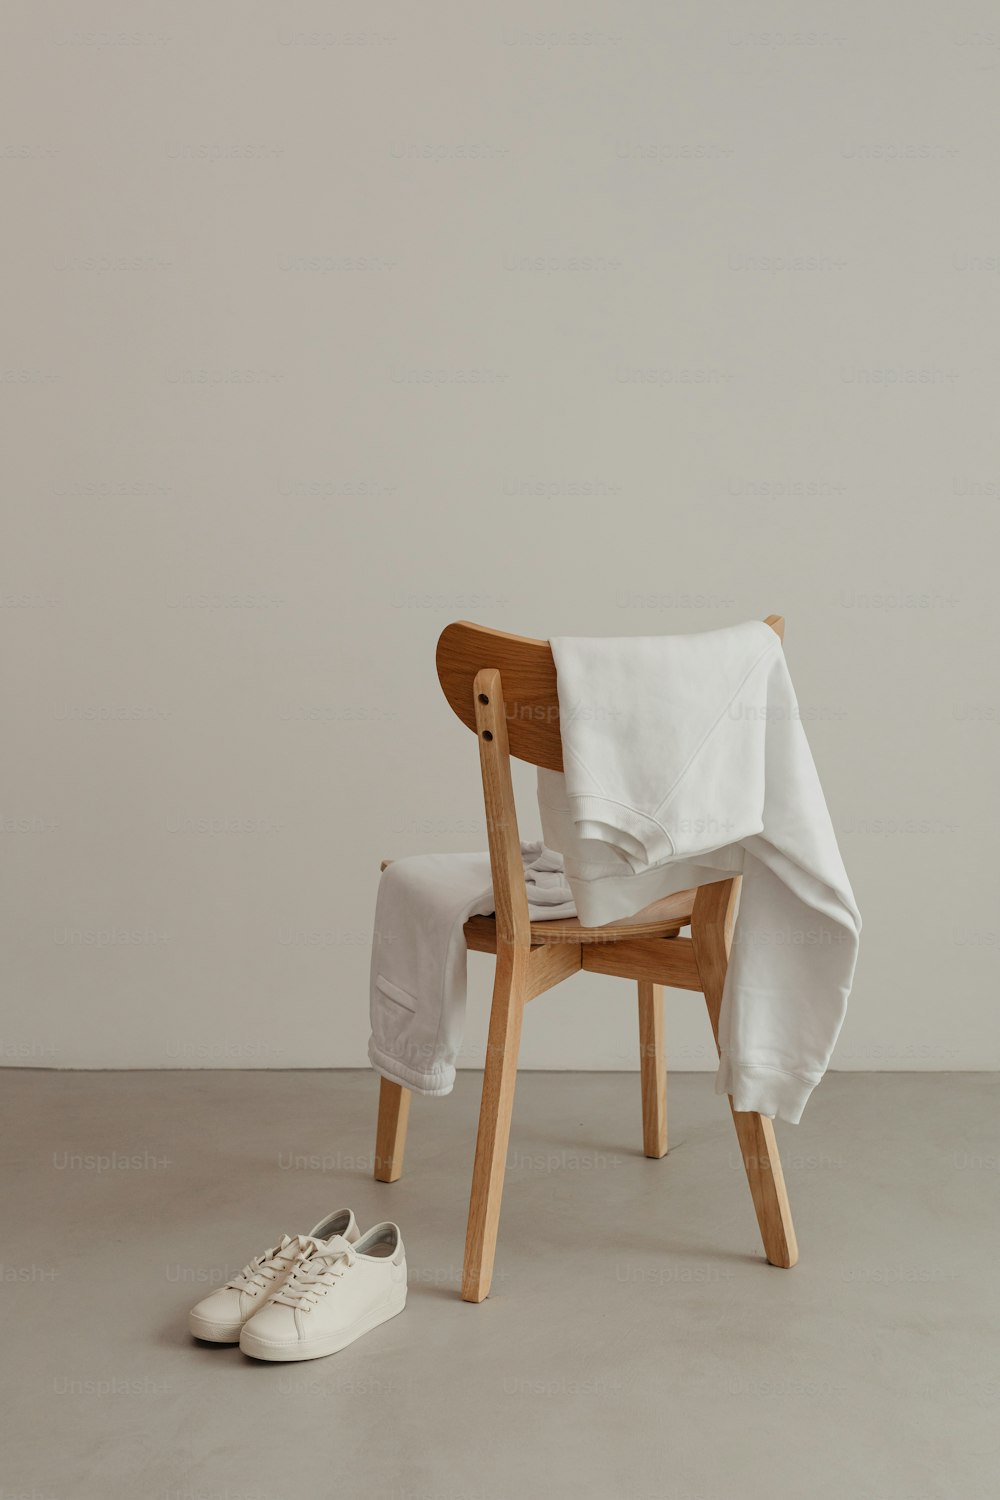 a wooden chair with a white cloth draped over it